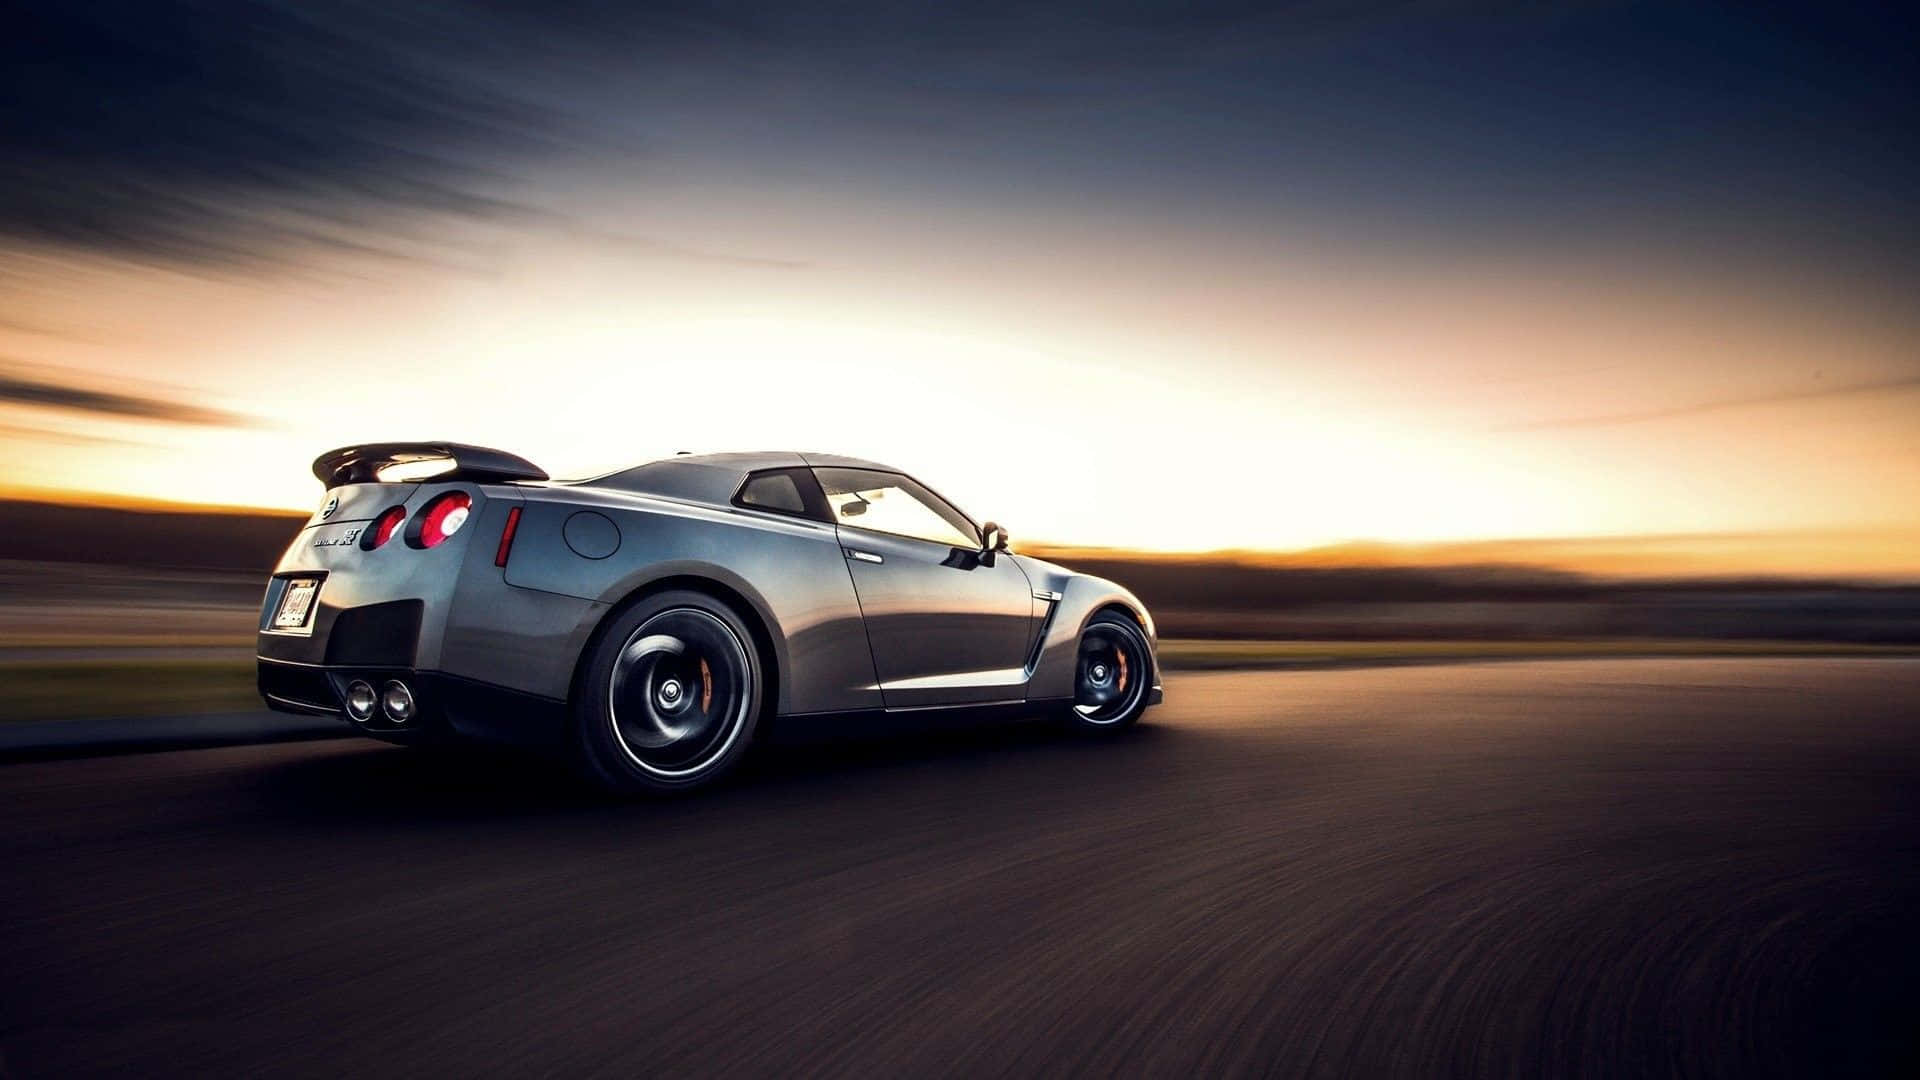 Speed, Style And Power - The Nissan Gtr R35